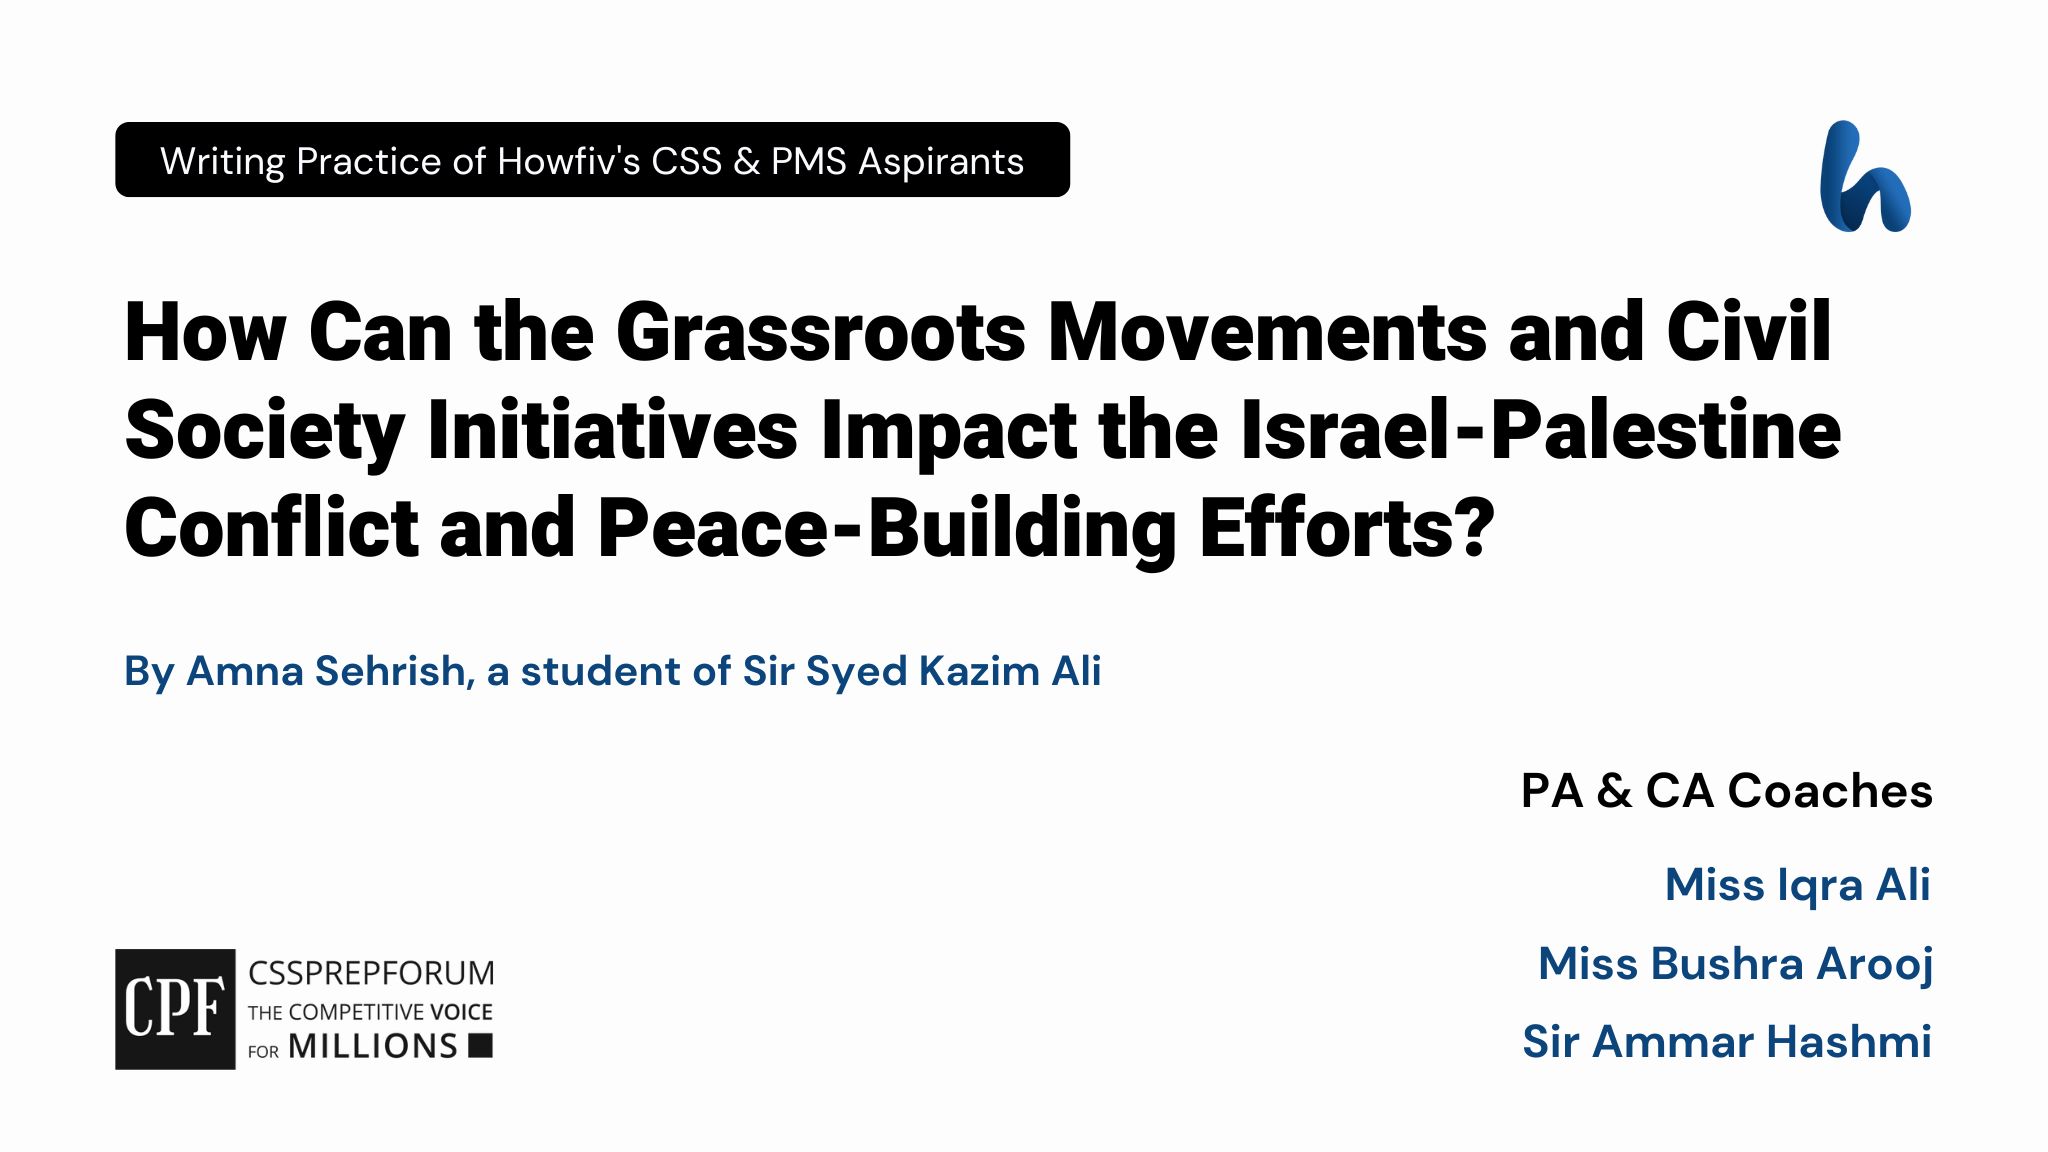 CSS Current Affairs article | Grassroots Movements' Impact on the Israel-Palestine Conflict | is written by Amna Sehrish under the supervision of Sir Ammar Hashmi...